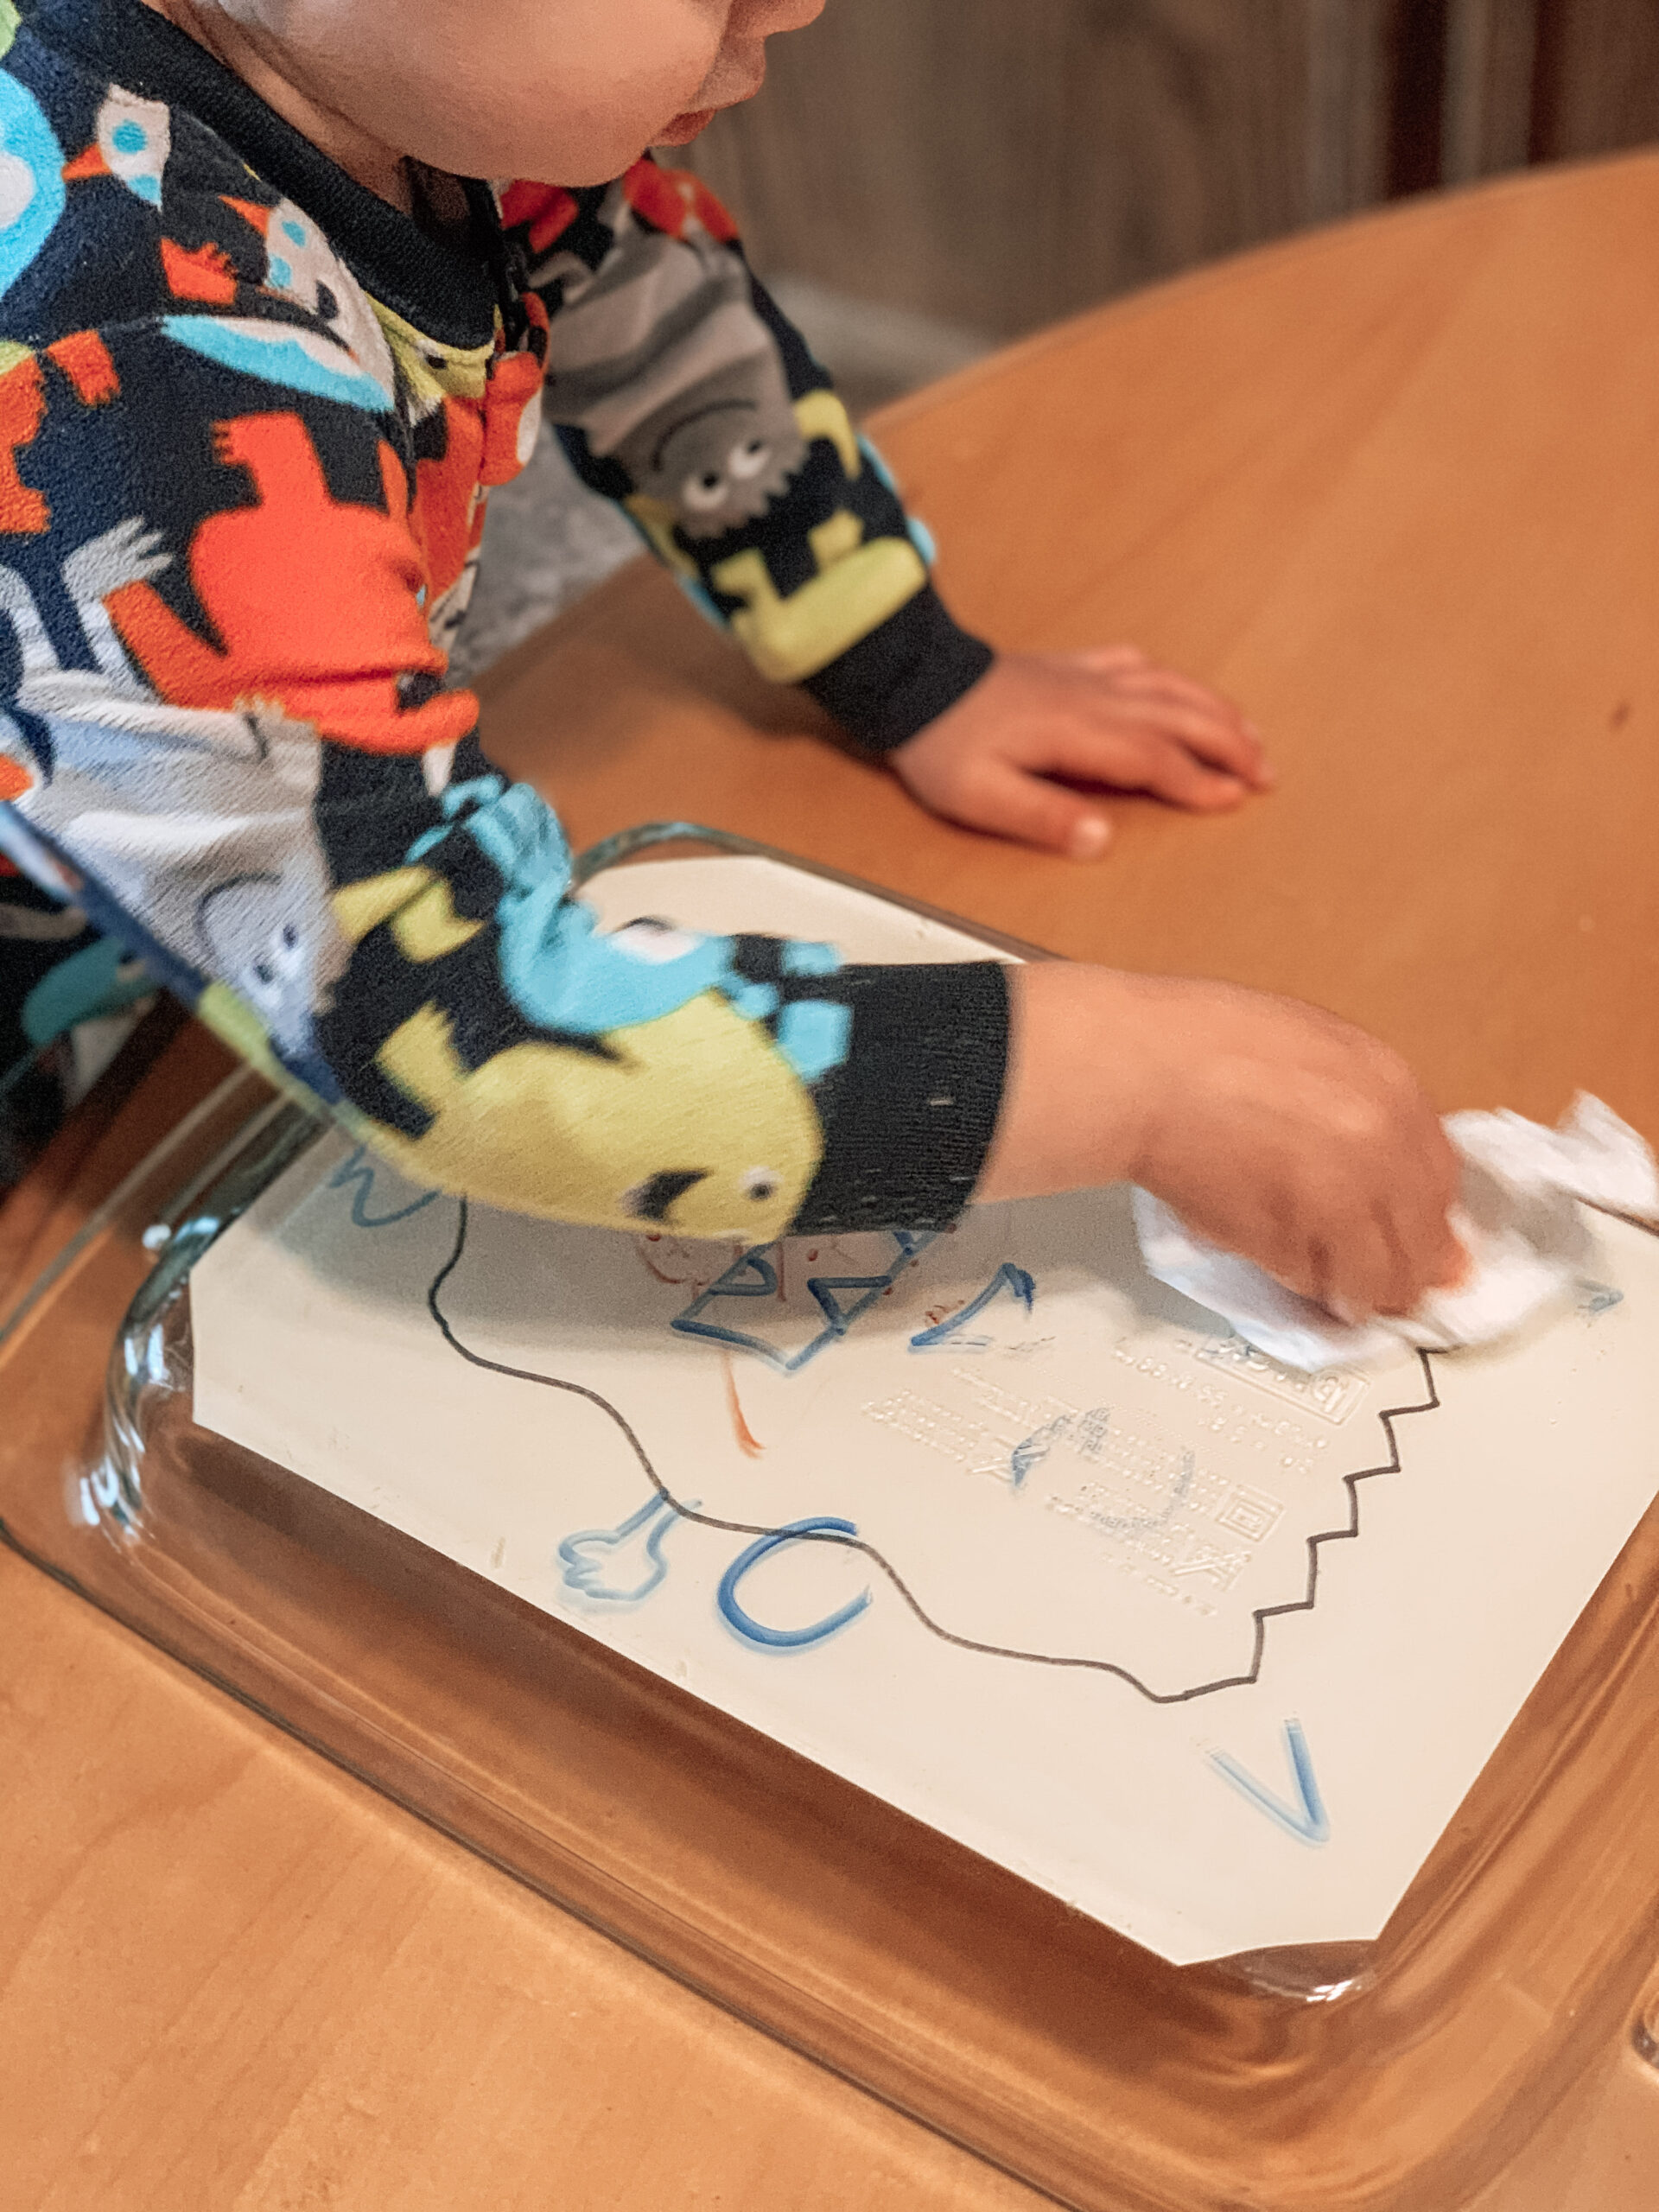 Child playing with repurposed monster craft. Kid is showing how to wipe off monster faces with activity.